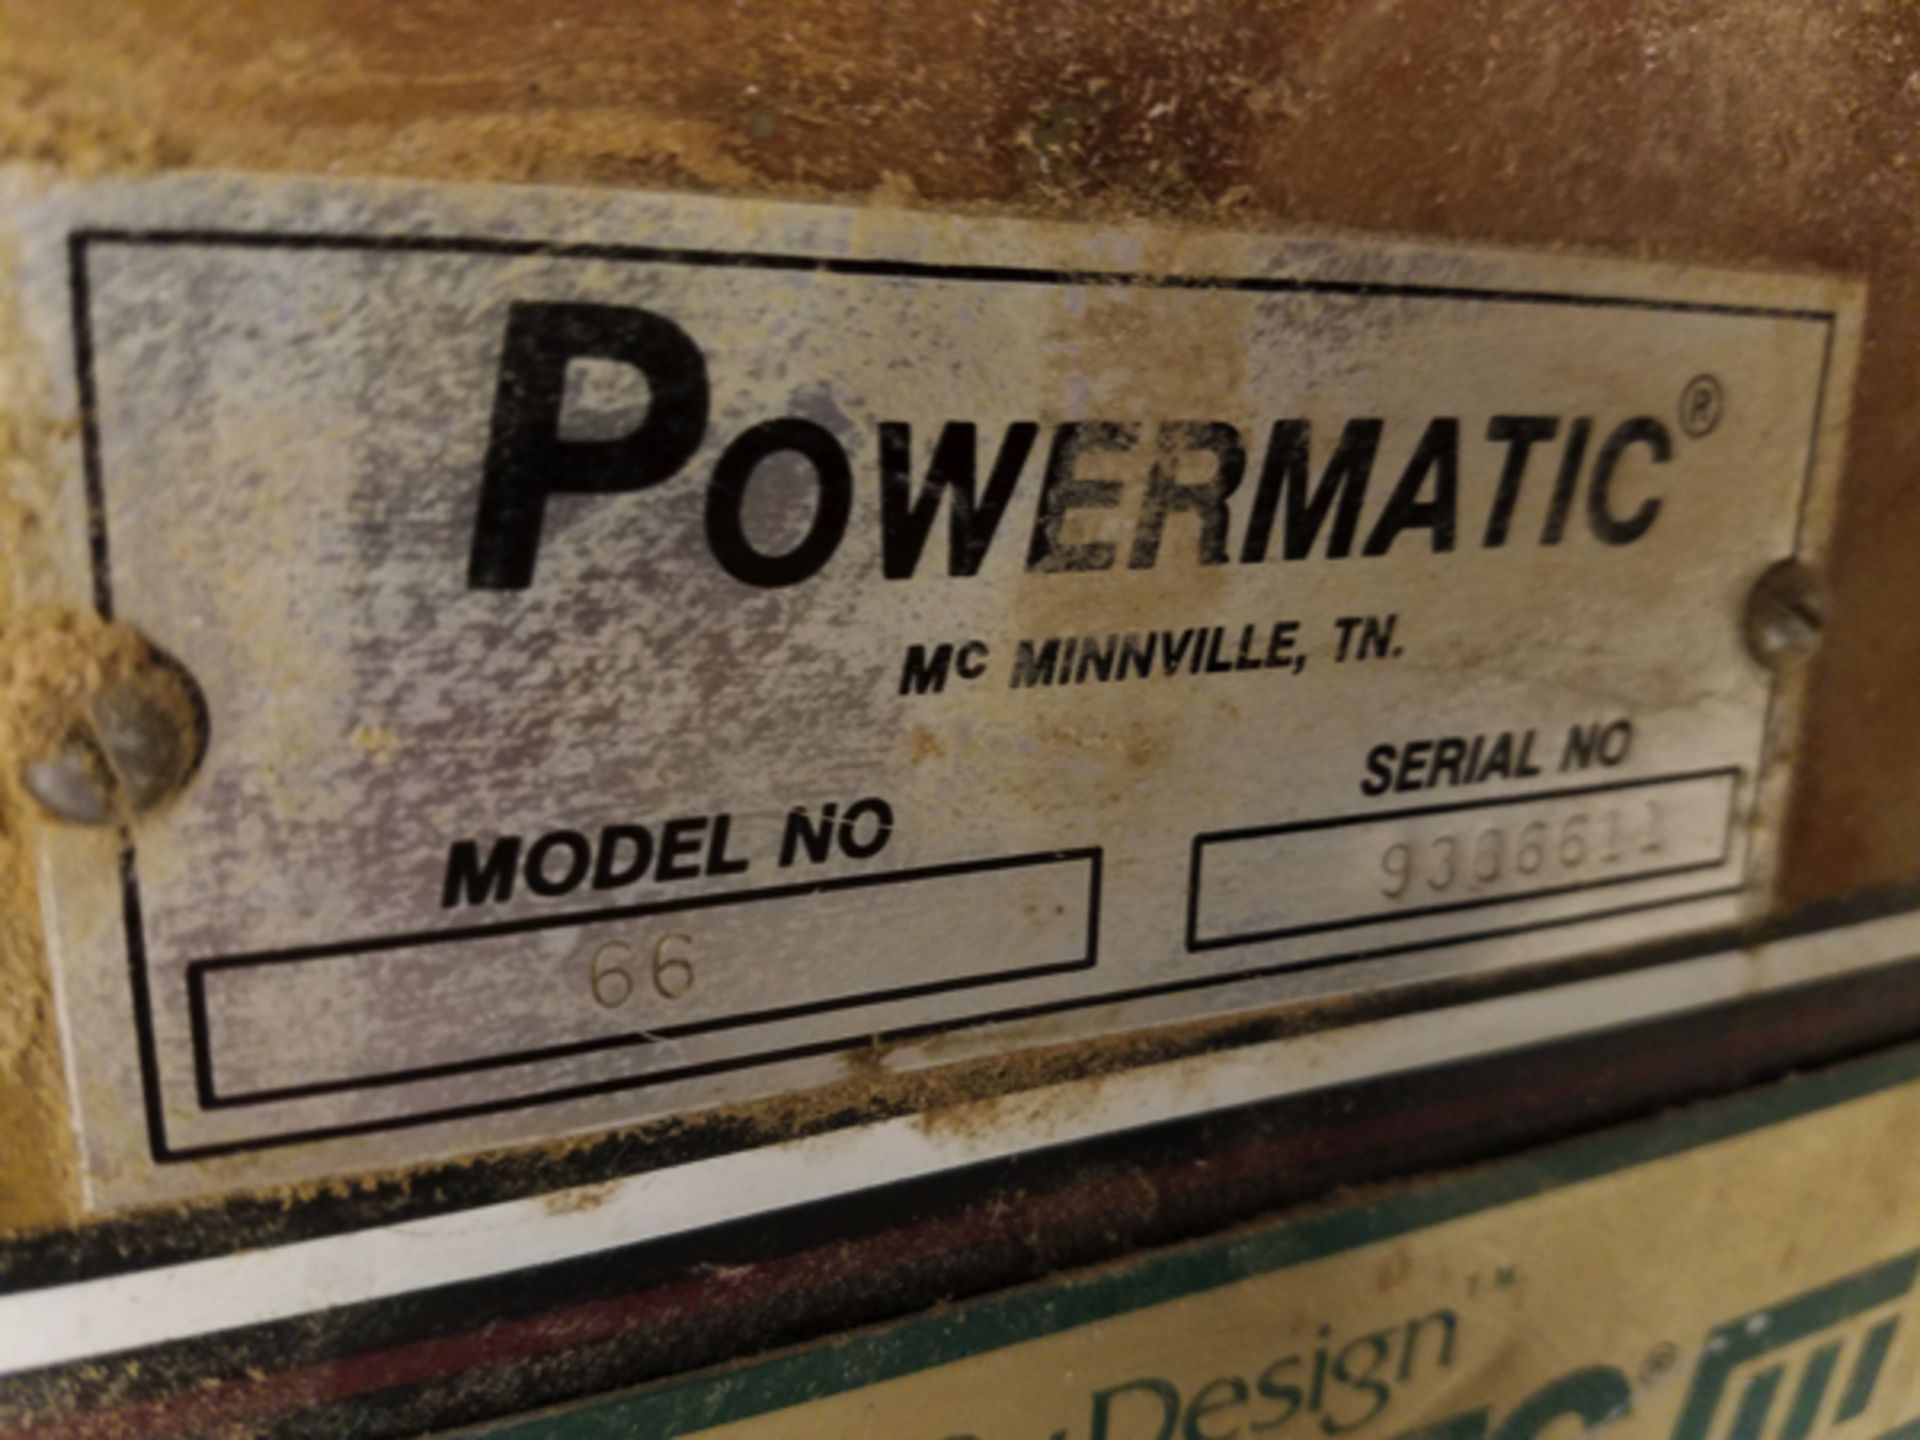 Powermatic Table Saw, M# 66, S/N 9366611, W/ Dust Collector | Rigging Price: $110 - Image 3 of 3